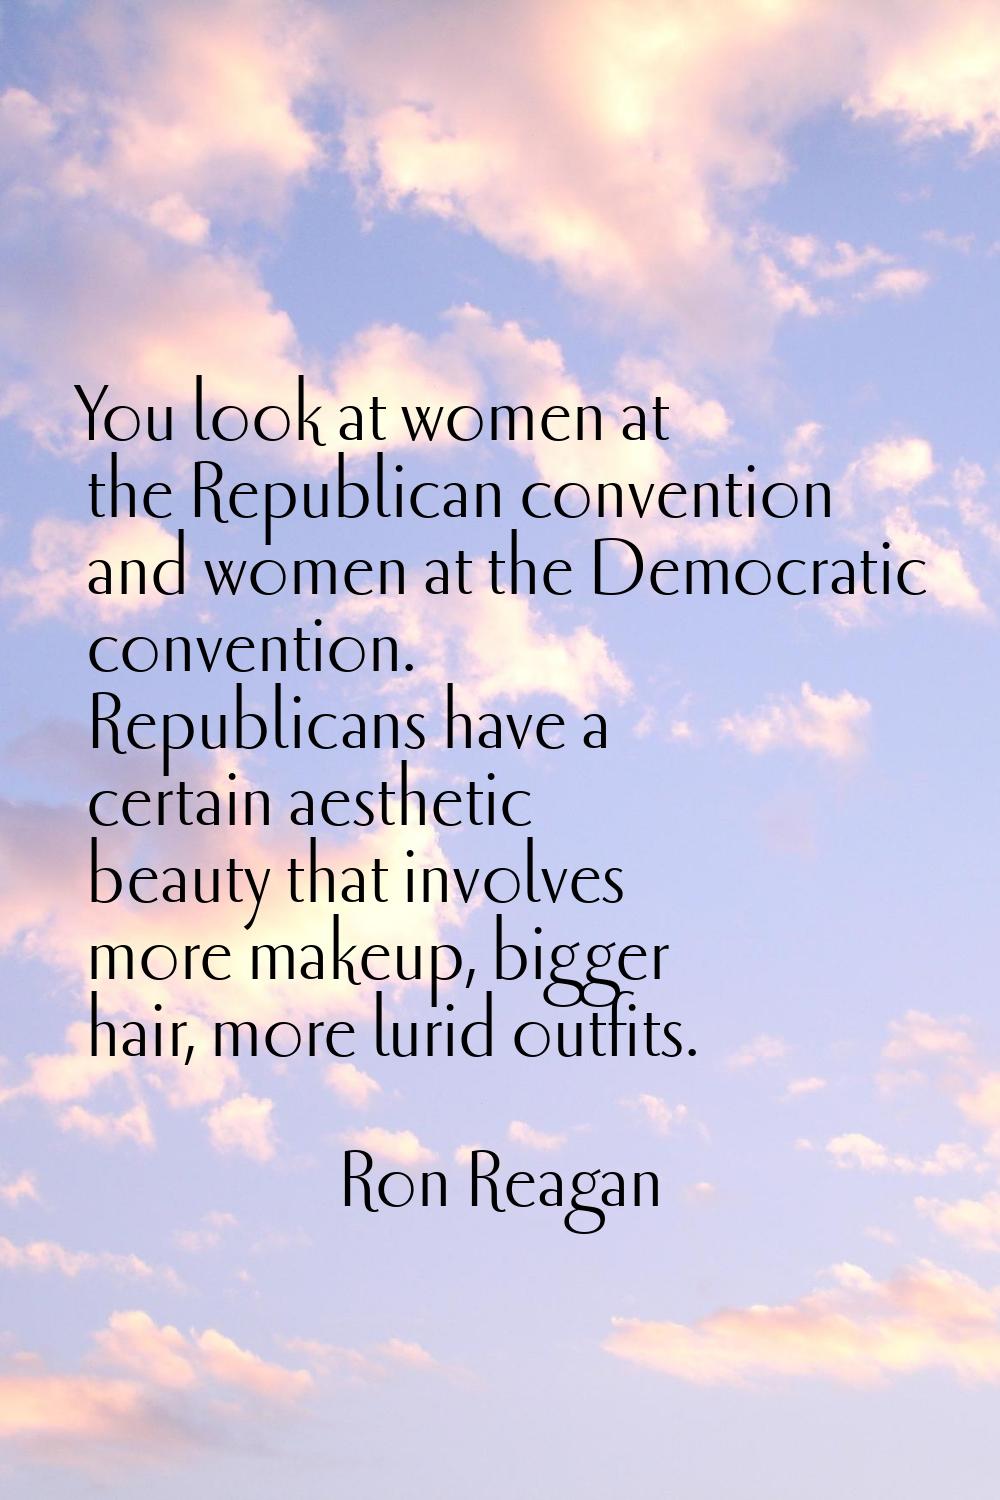 You look at women at the Republican convention and women at the Democratic convention. Republicans 